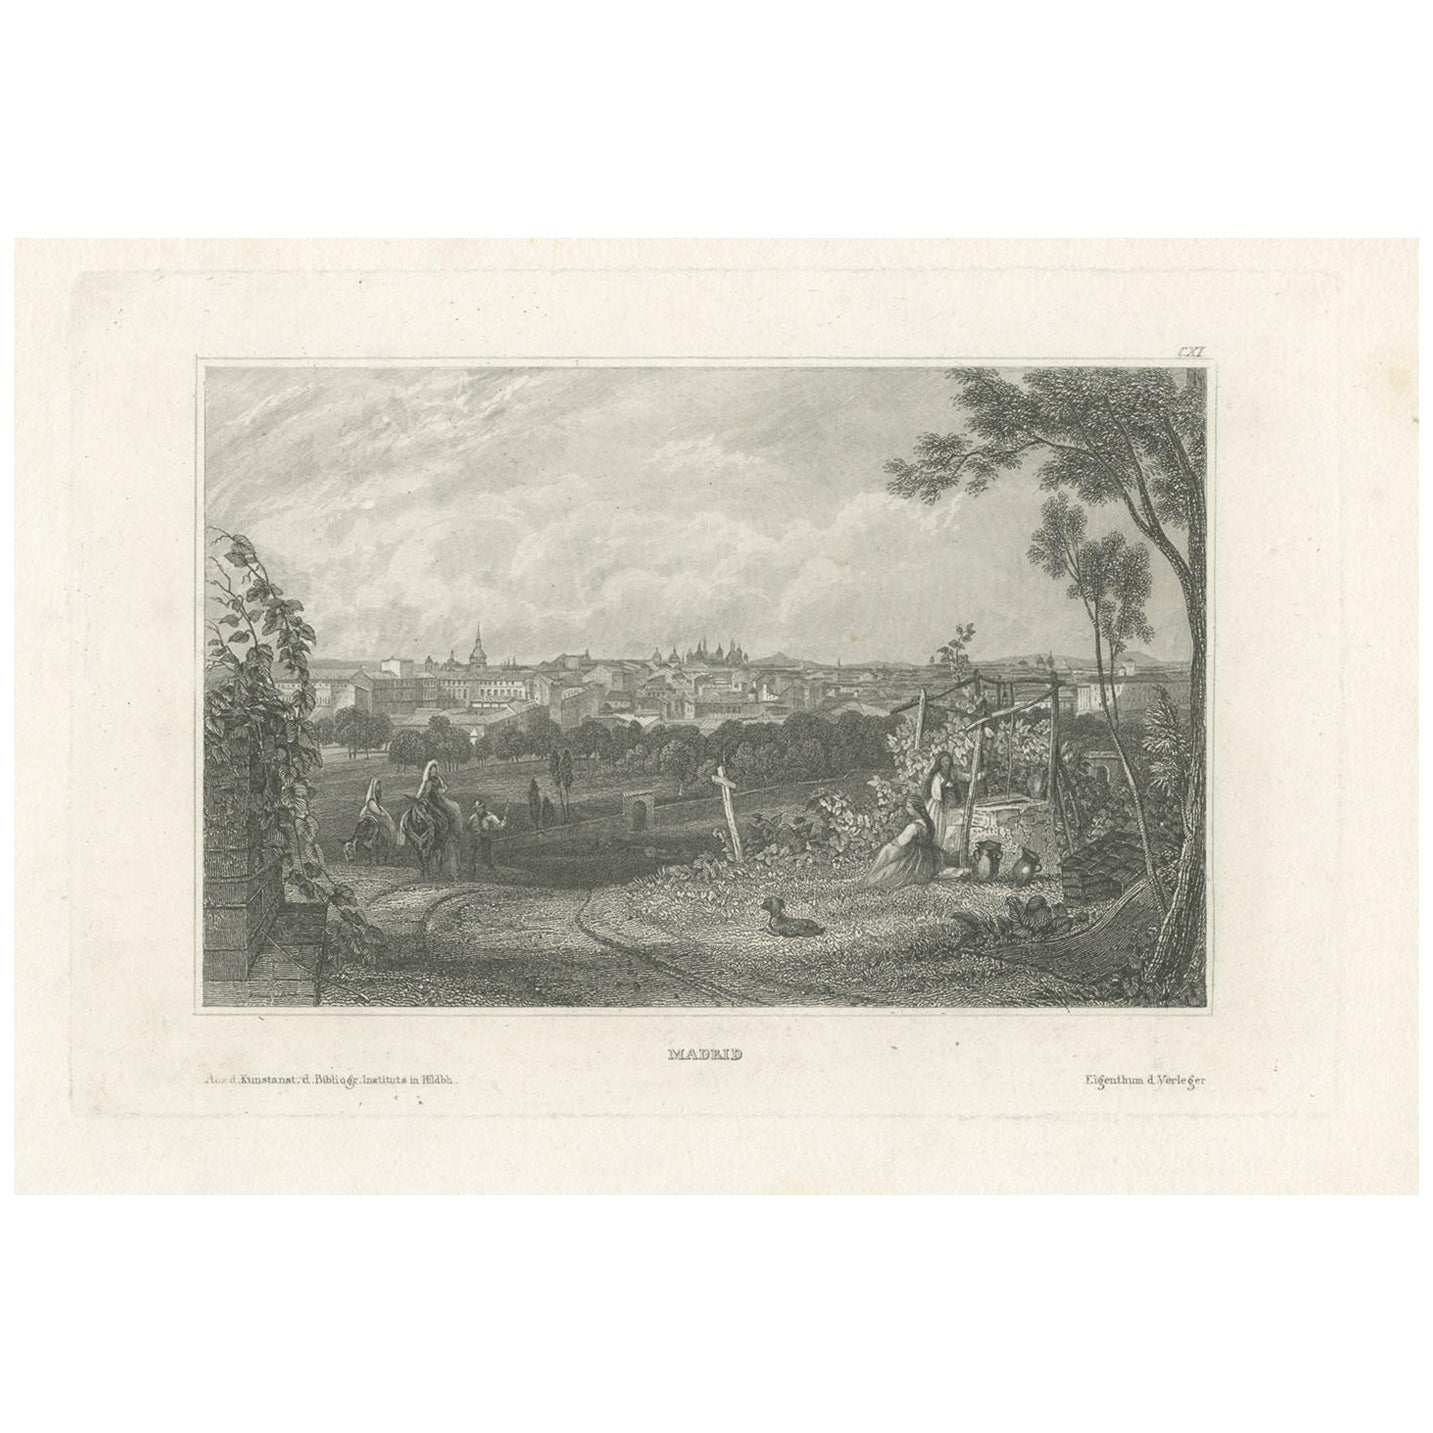 Original Antique Print of the City of Madrid, Spain For Sale